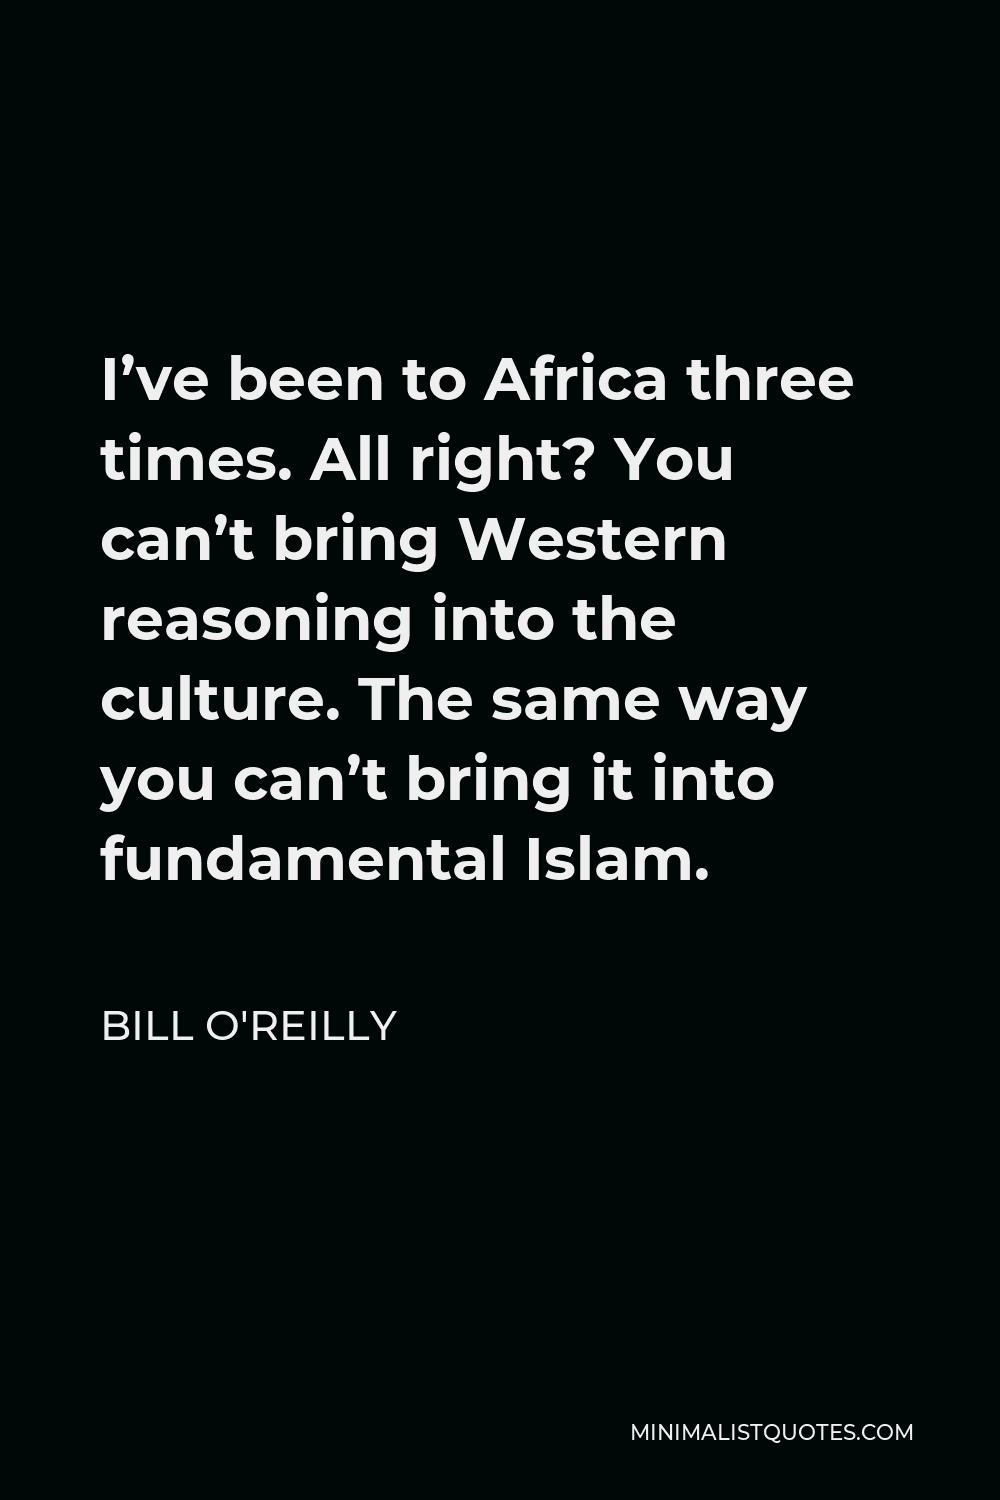 Bill O'Reilly Quote - I’ve been to Africa three times. All right? You can’t bring Western reasoning into the culture. The same way you can’t bring it into fundamental Islam.